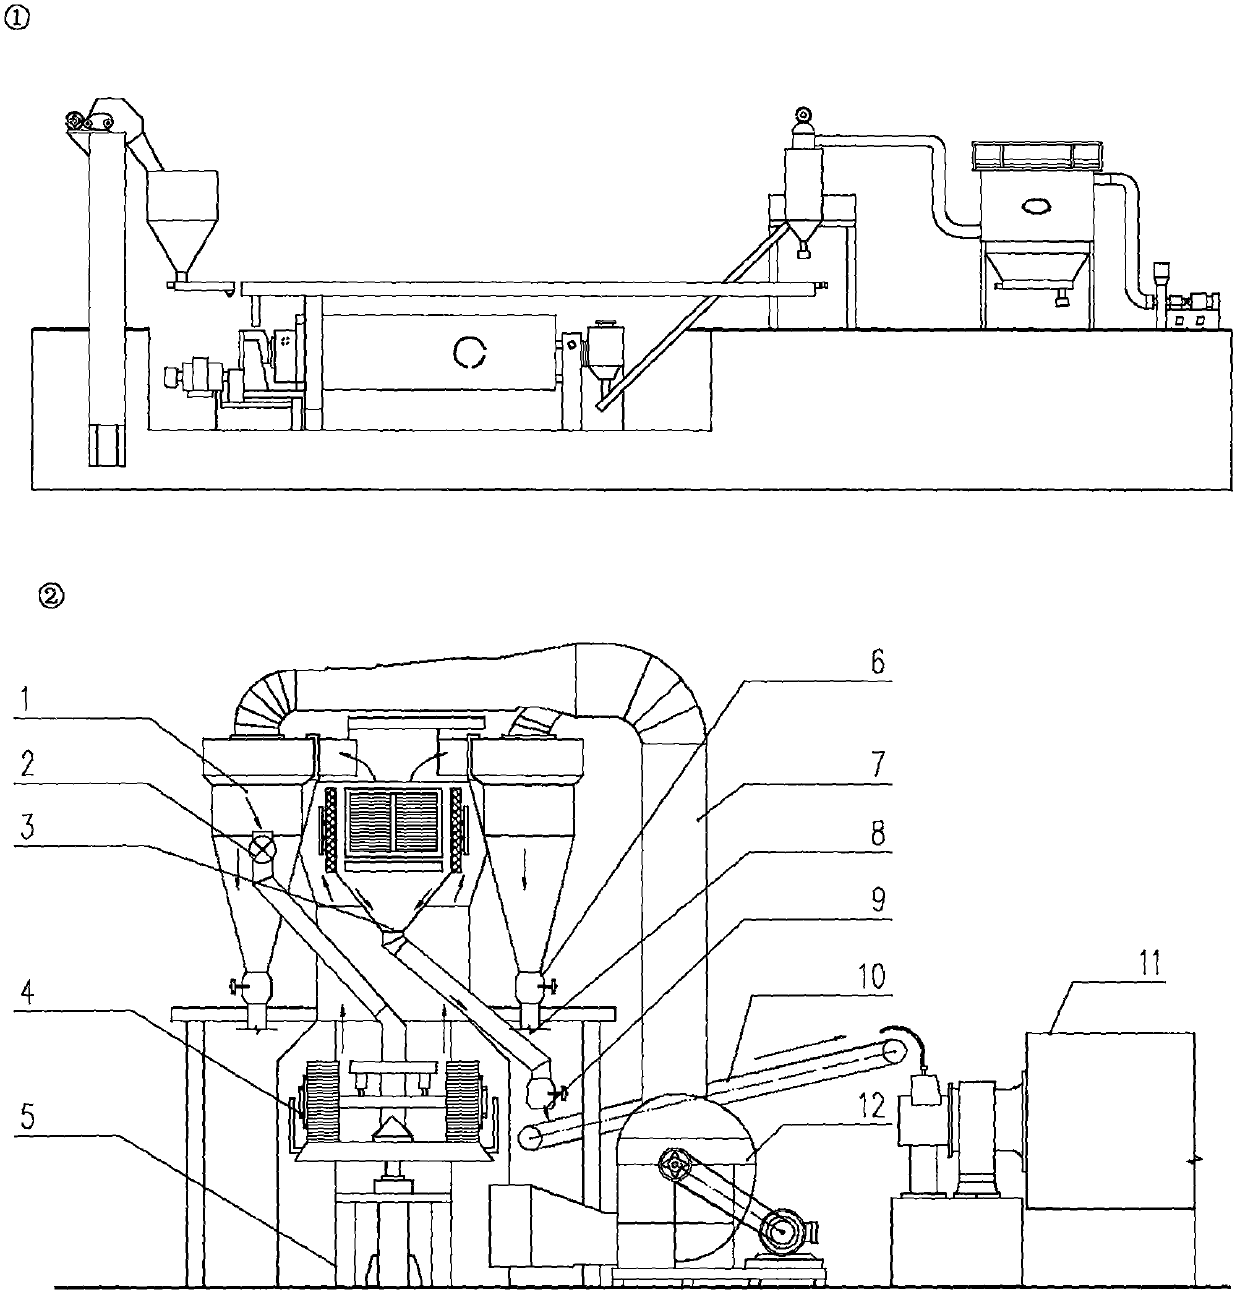 Production method for preparing natural ore or red soil into ultrafine powder